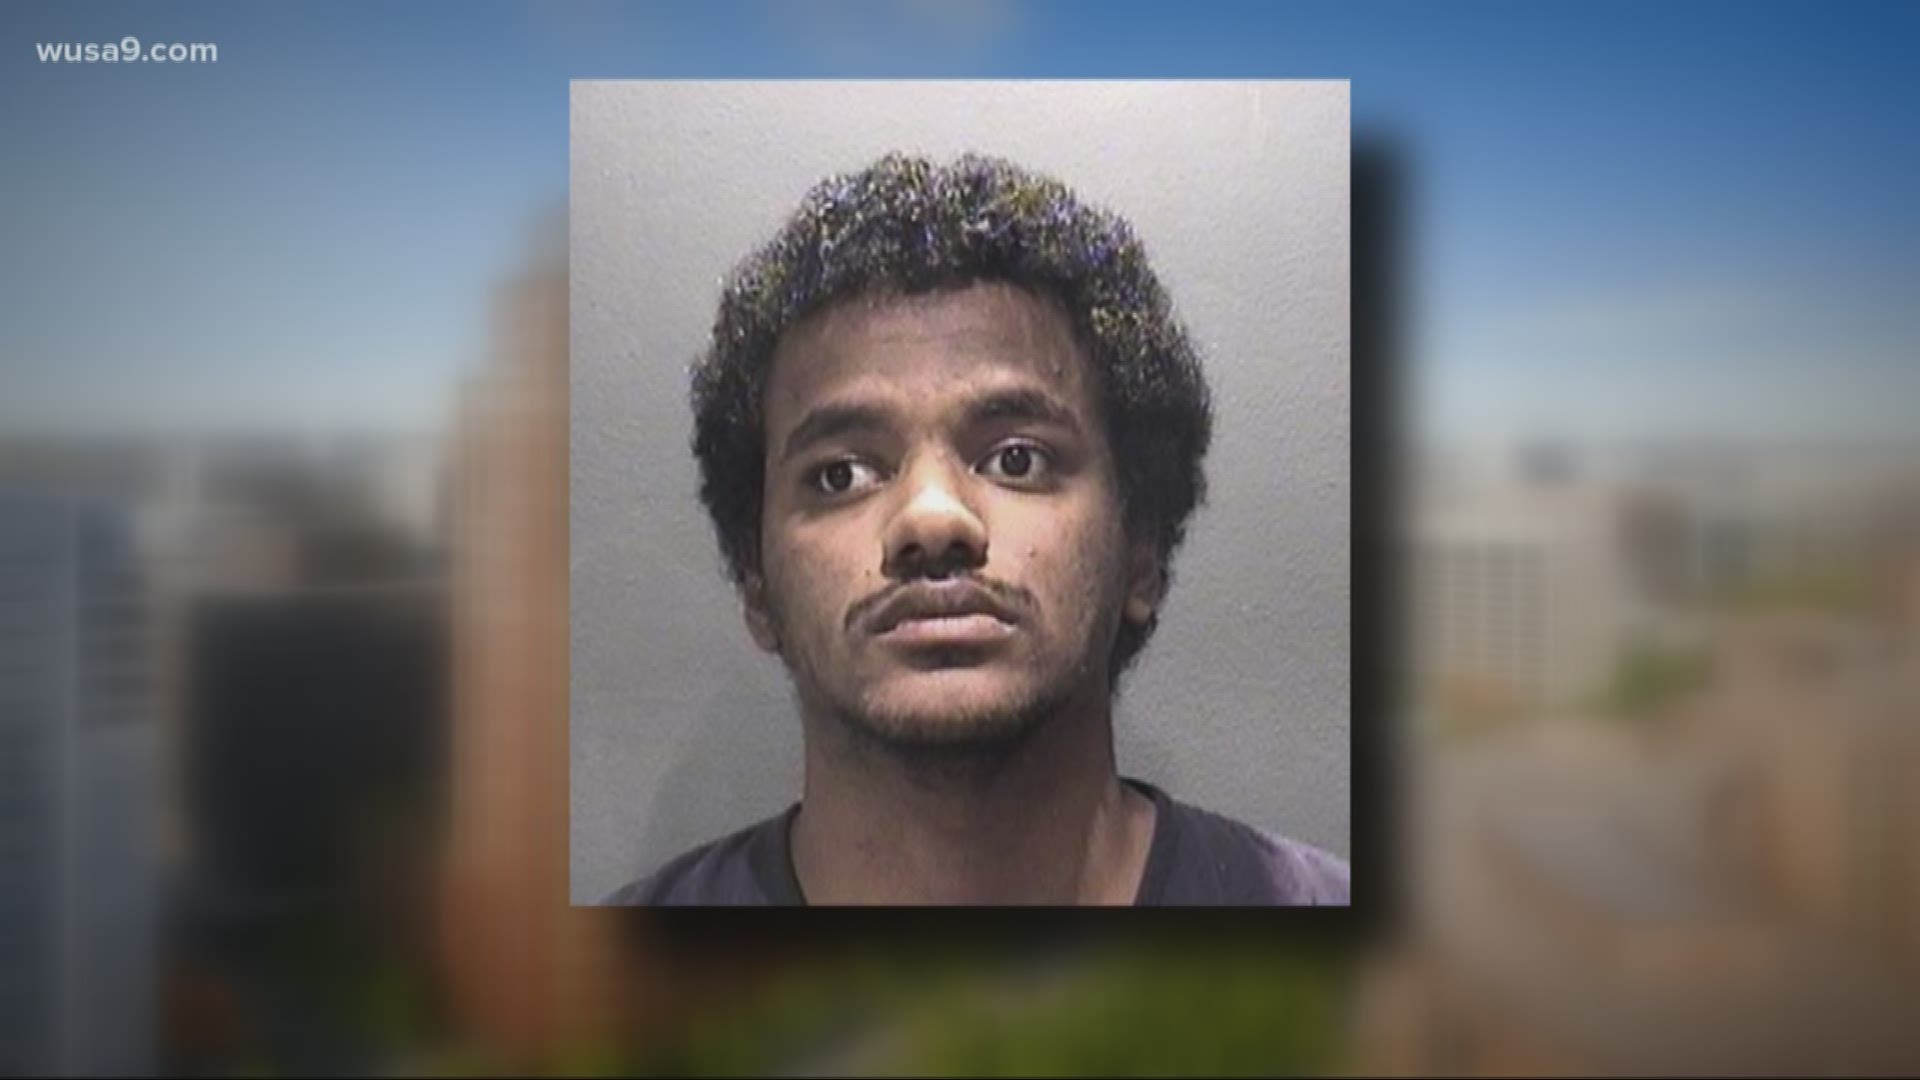 An Arlington man is accused of killing his mother who fell from an upper floor of a hotel in Crystal City.